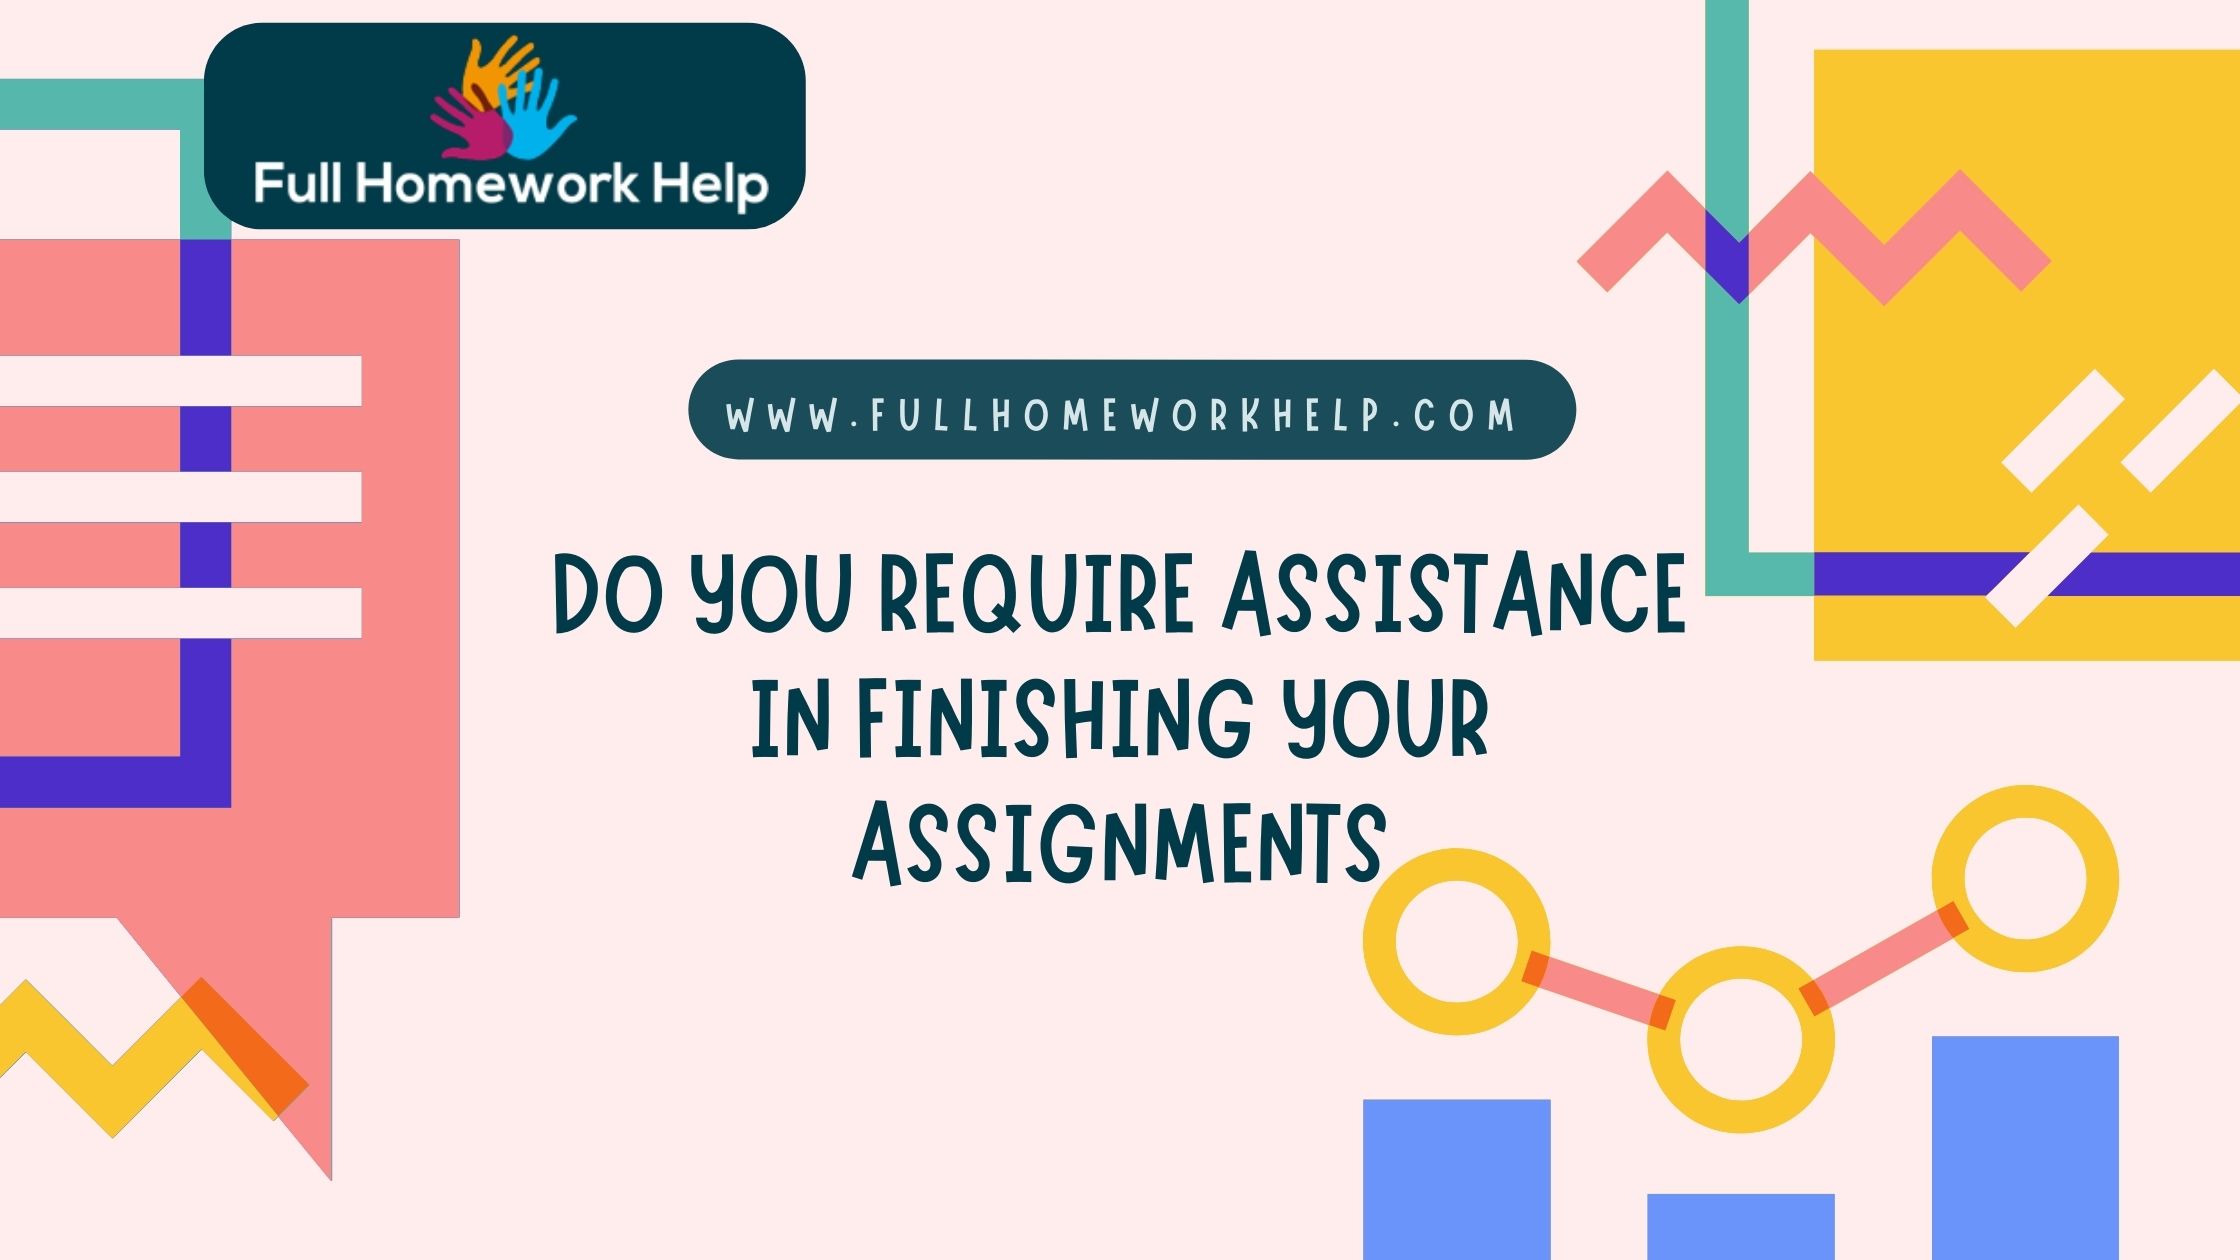 Do you require assistance in finishing your assignments